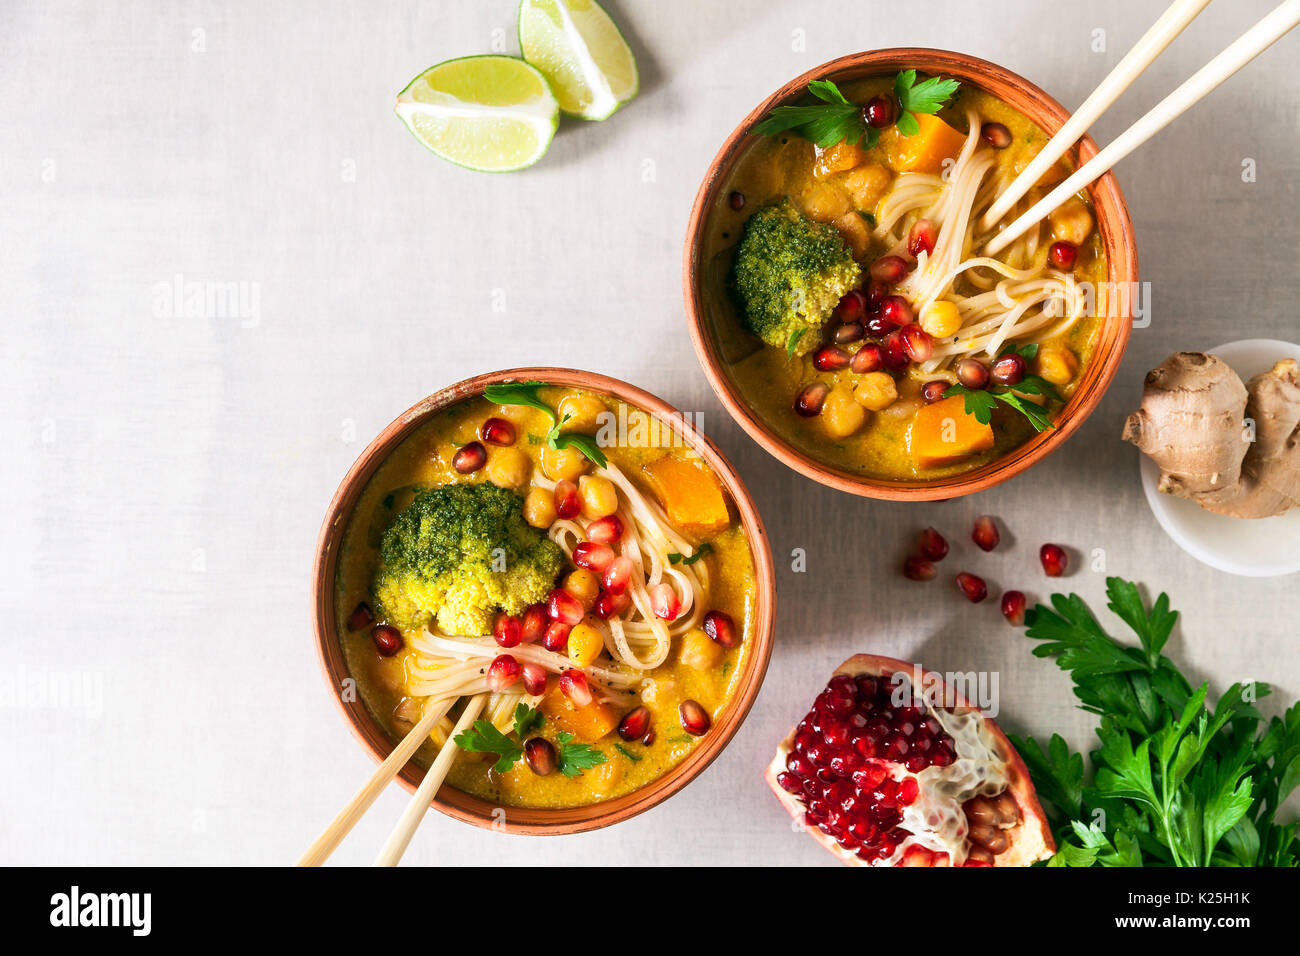 Laksa noodle soup With pumpkin and broccoli Stock Photo